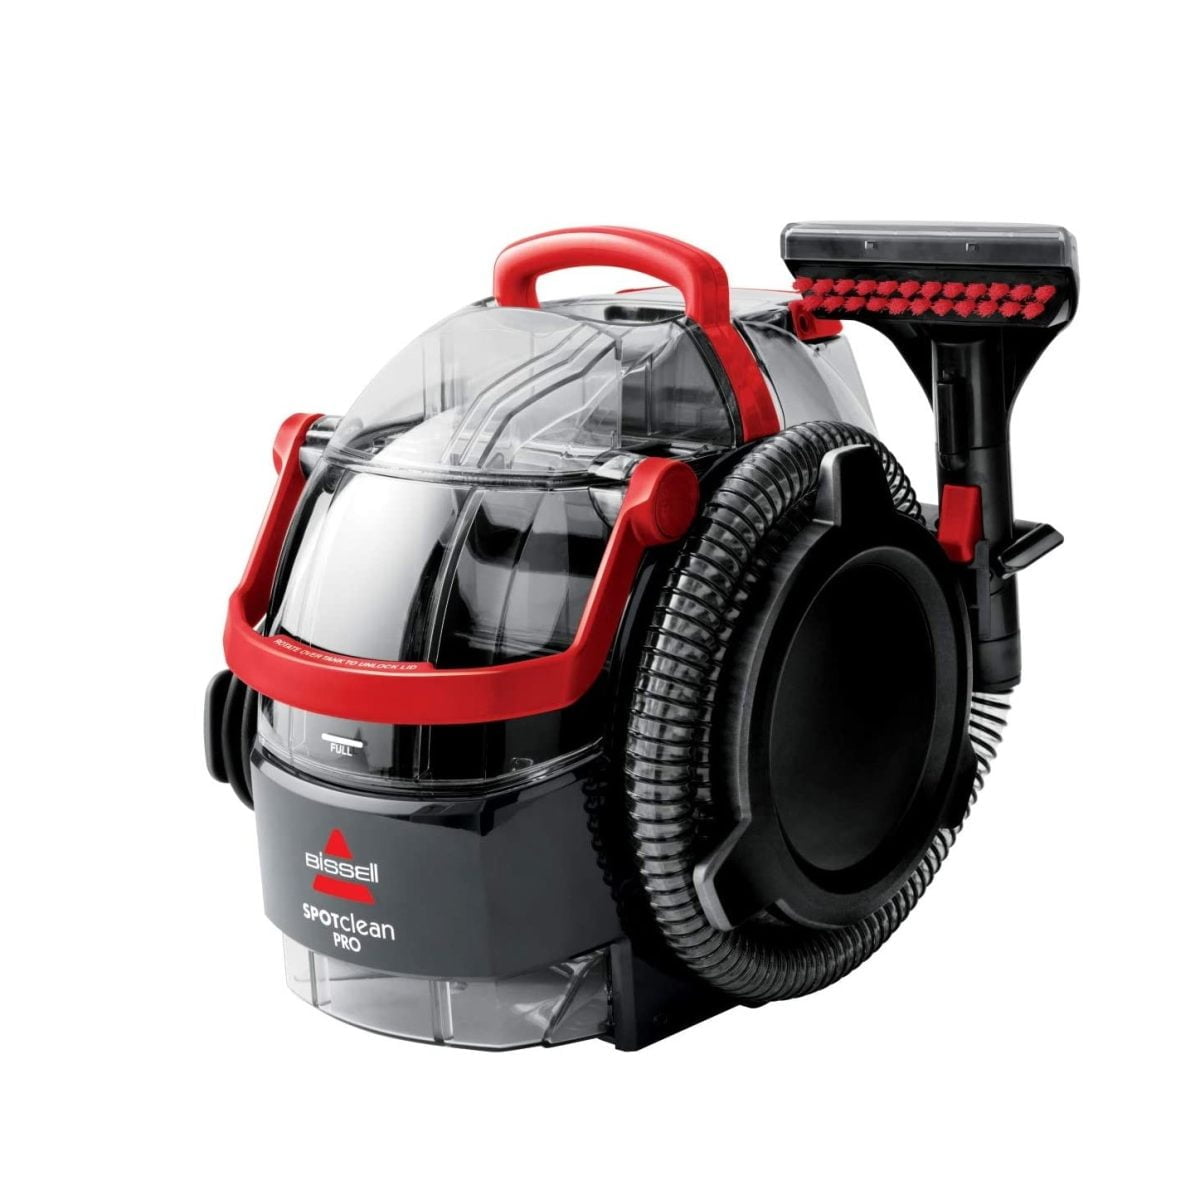 Bissell Spotclean Pro Portable Carpet Cleaner 1558N Black / Red